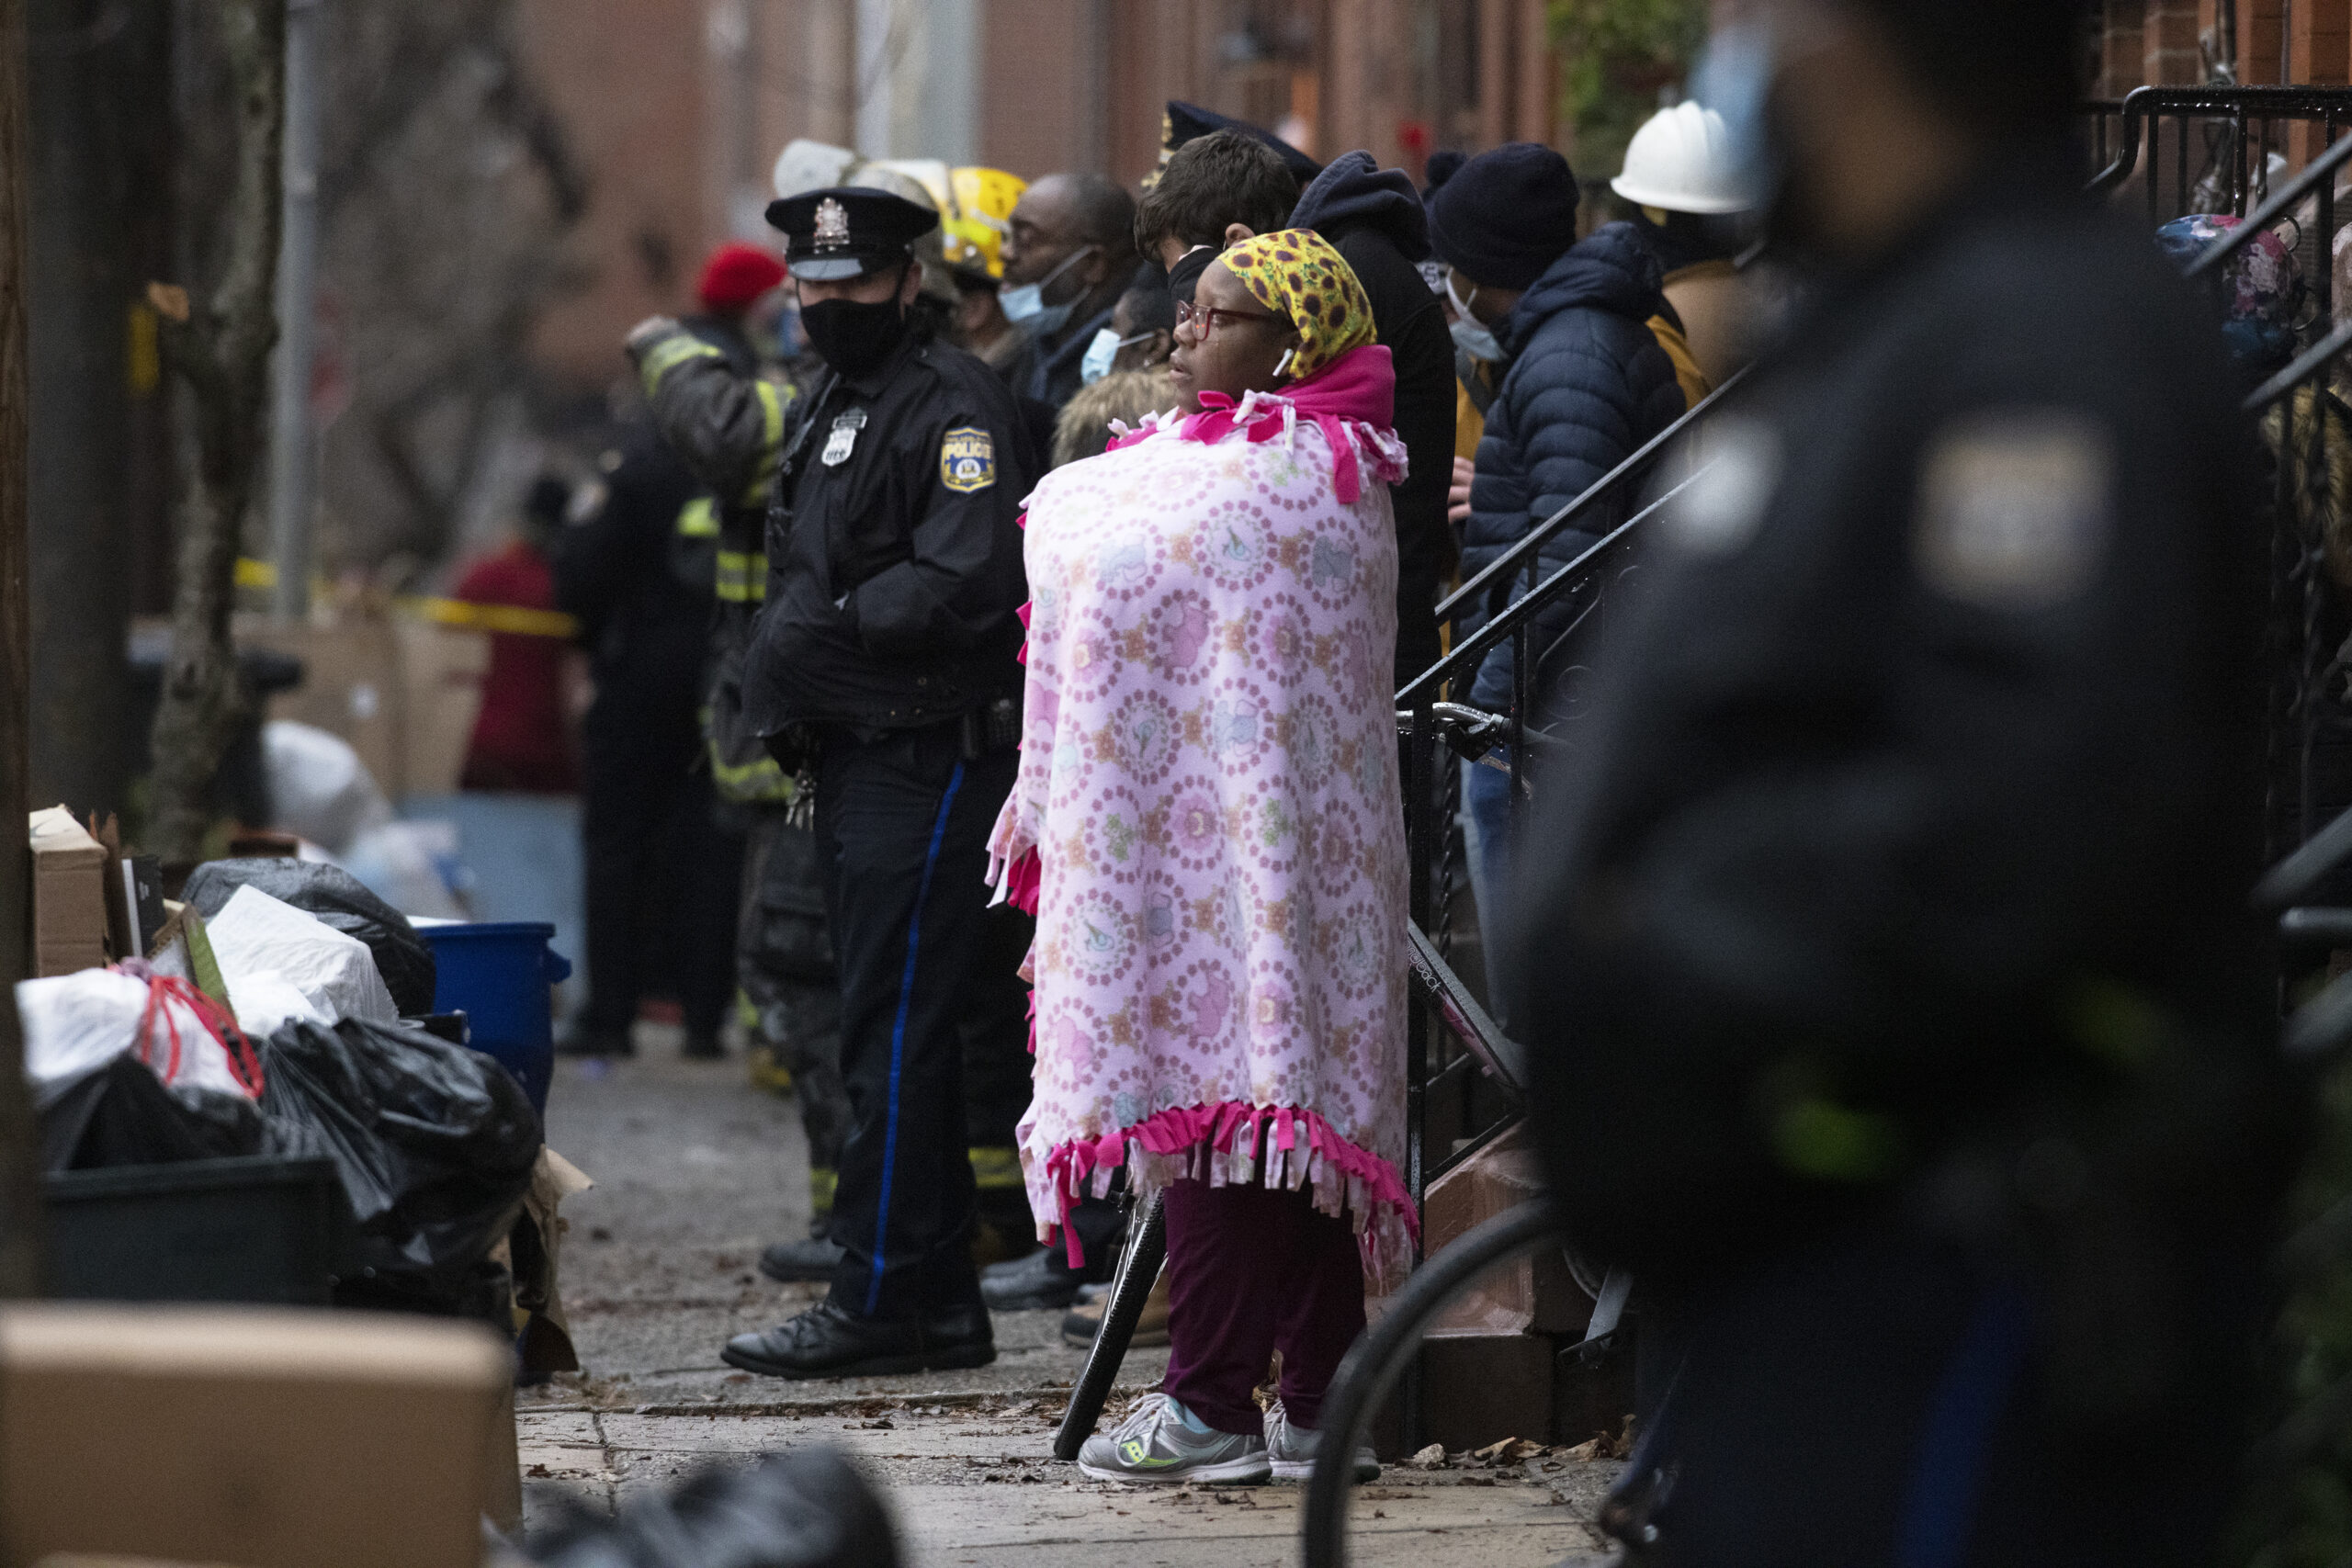 Bystanders watch as the Philadelphia fire department works at the scene of a deadly row house fire in Philadelphia on Wednesday, Jan. 5, 2022. Firefighters and police responded to the fatal fire at a three-story rowhouse in the city's Fairmount neighborhood around 6:40 a.m. and found flames coming from the second-floor windows, fire officials said. (Alejandro A. Alvarez/The Philadelphia Inquirer via AP)